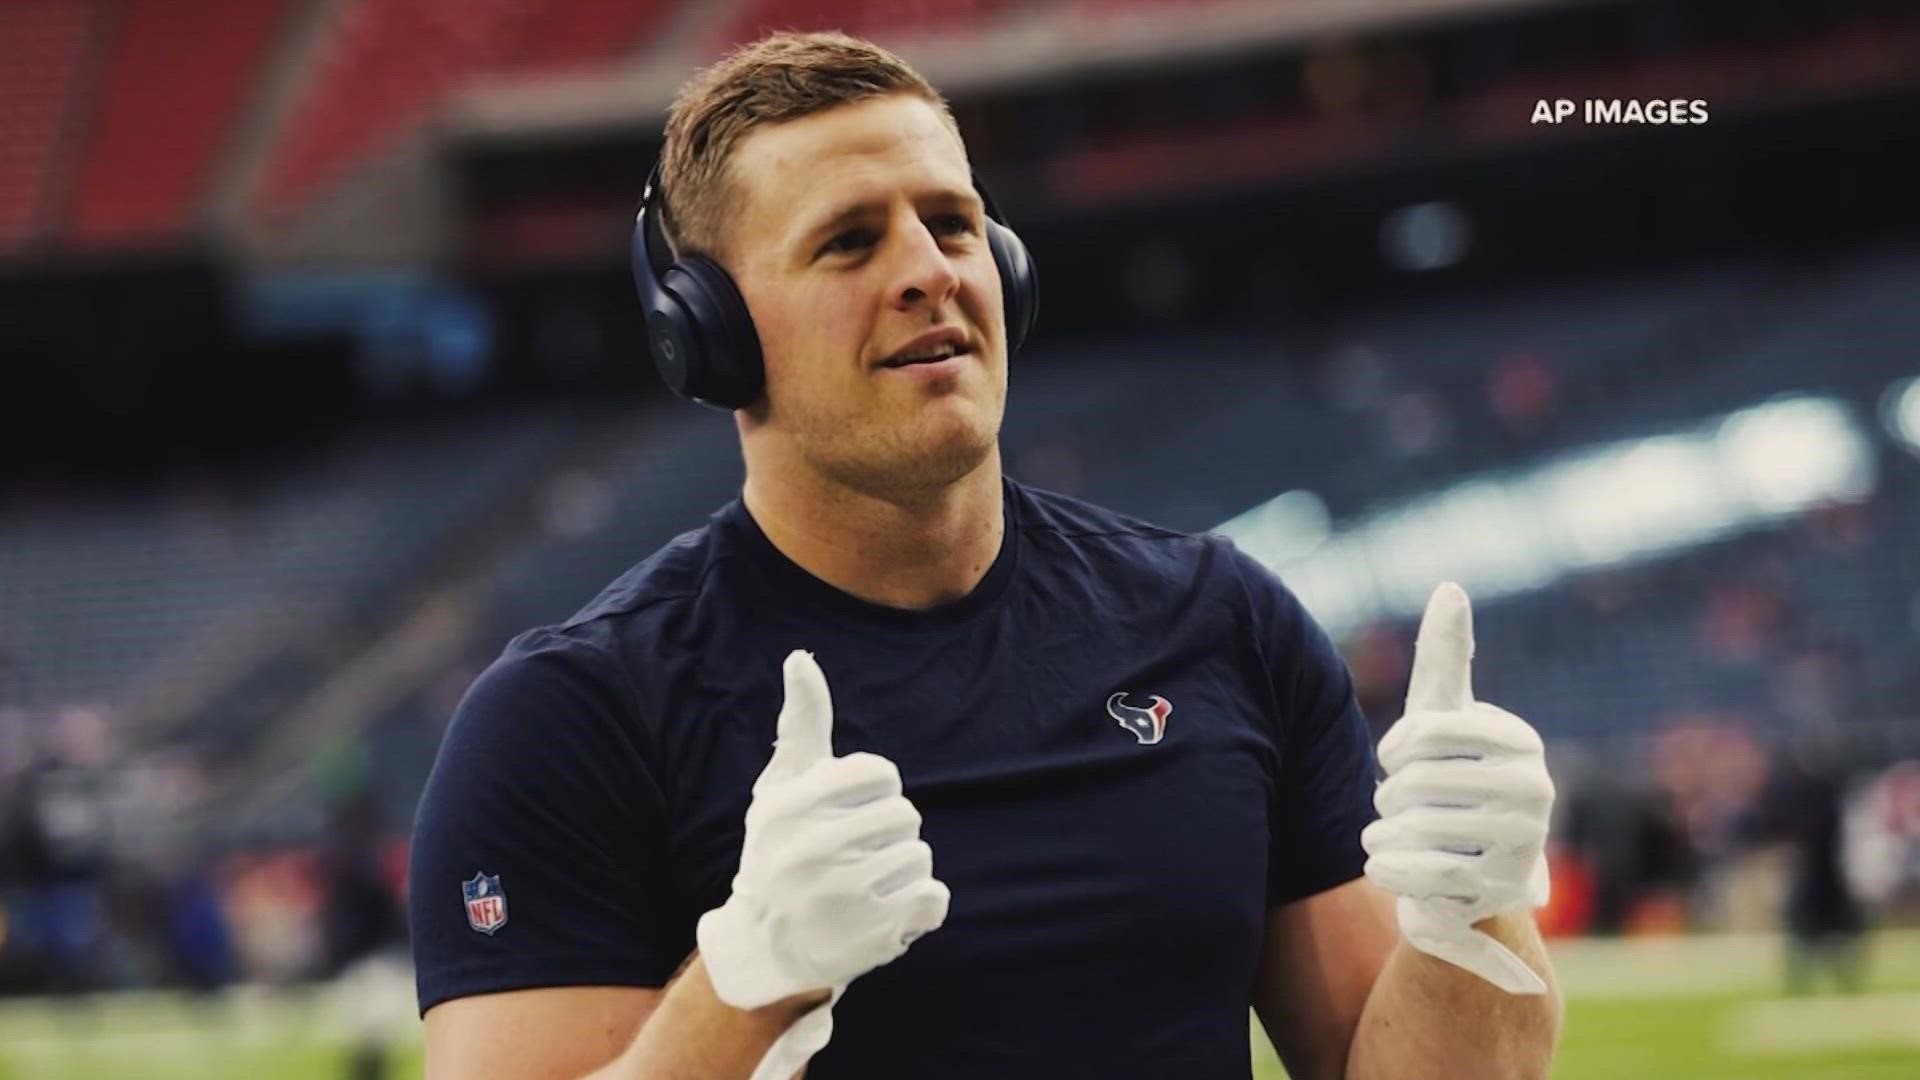 Defensive end JJ Watt set records during his 12-season NFL career, but will be remembered for his philanthropy as well.